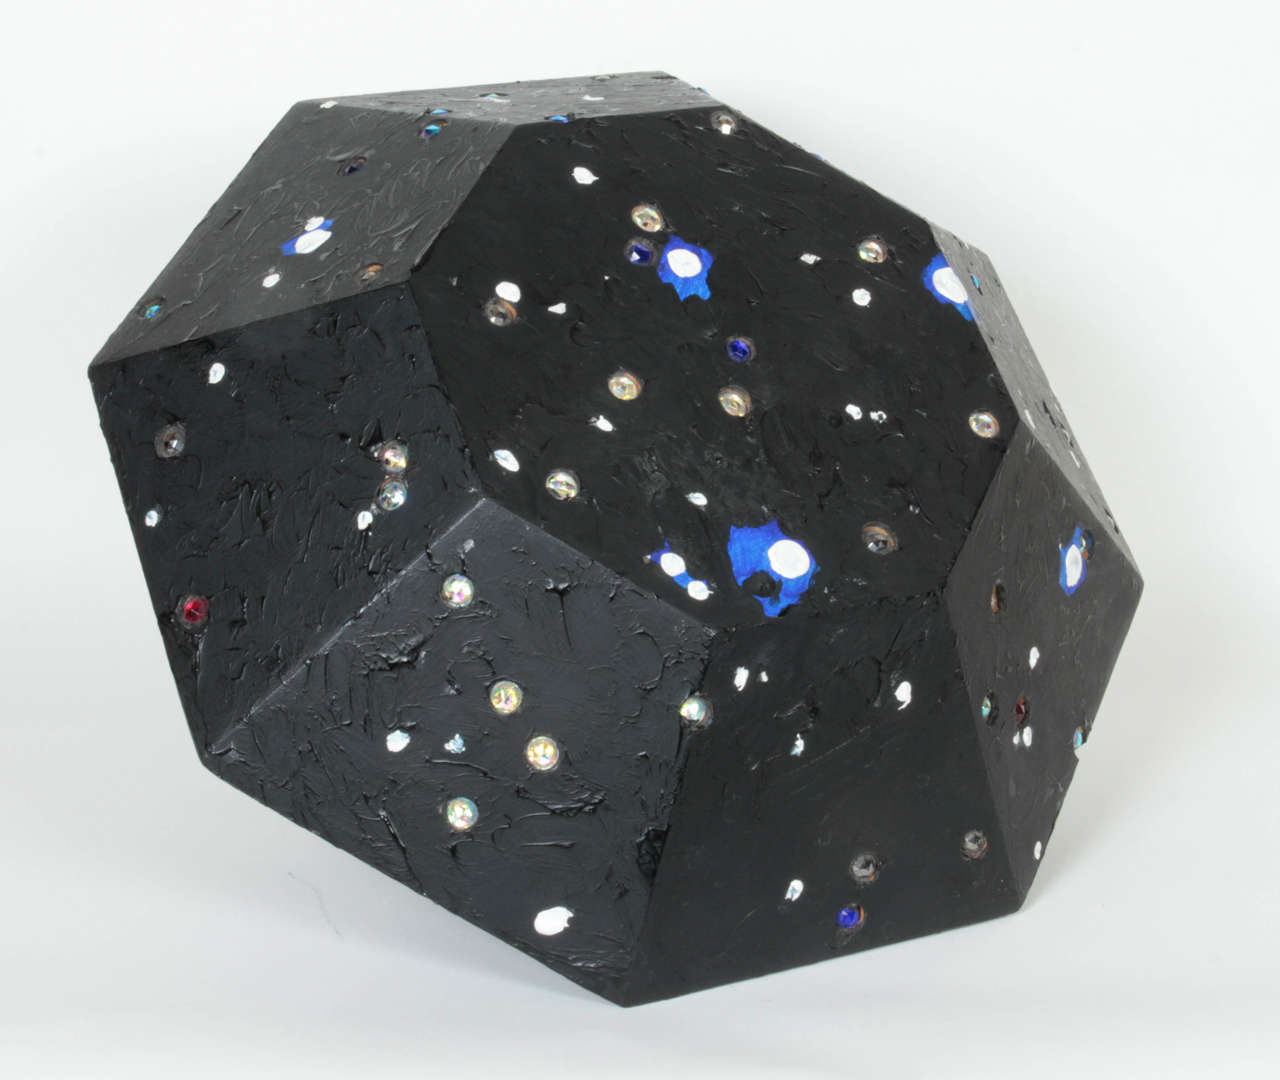 This faceted, geometric sculpture by the contemporary New York artist John Torreano dates to the mid-1980s.